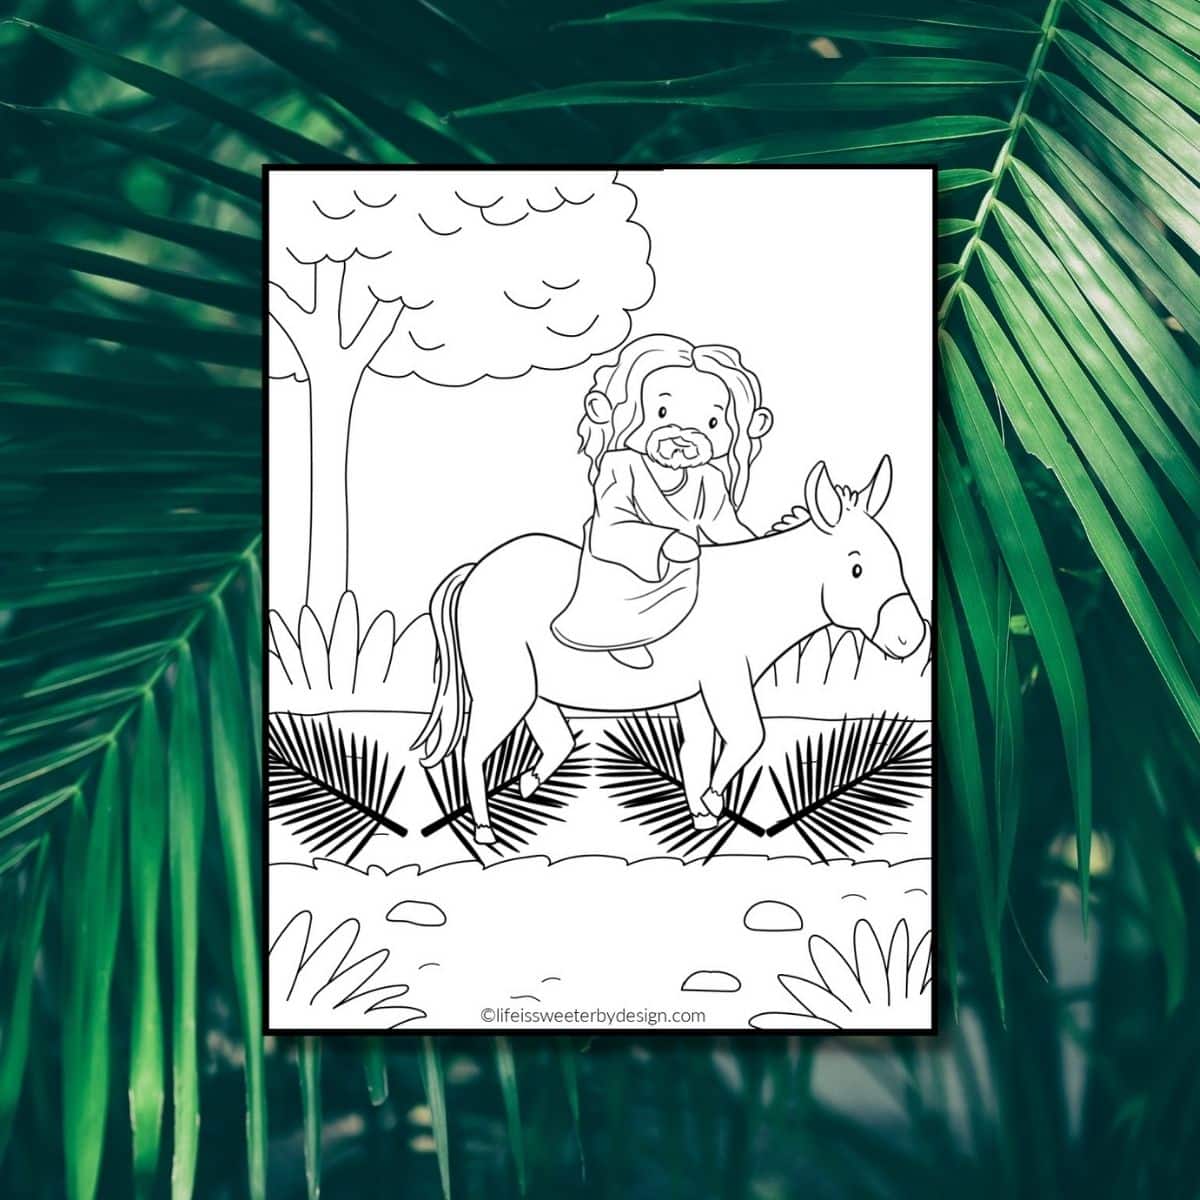 Palm sunday coloring page